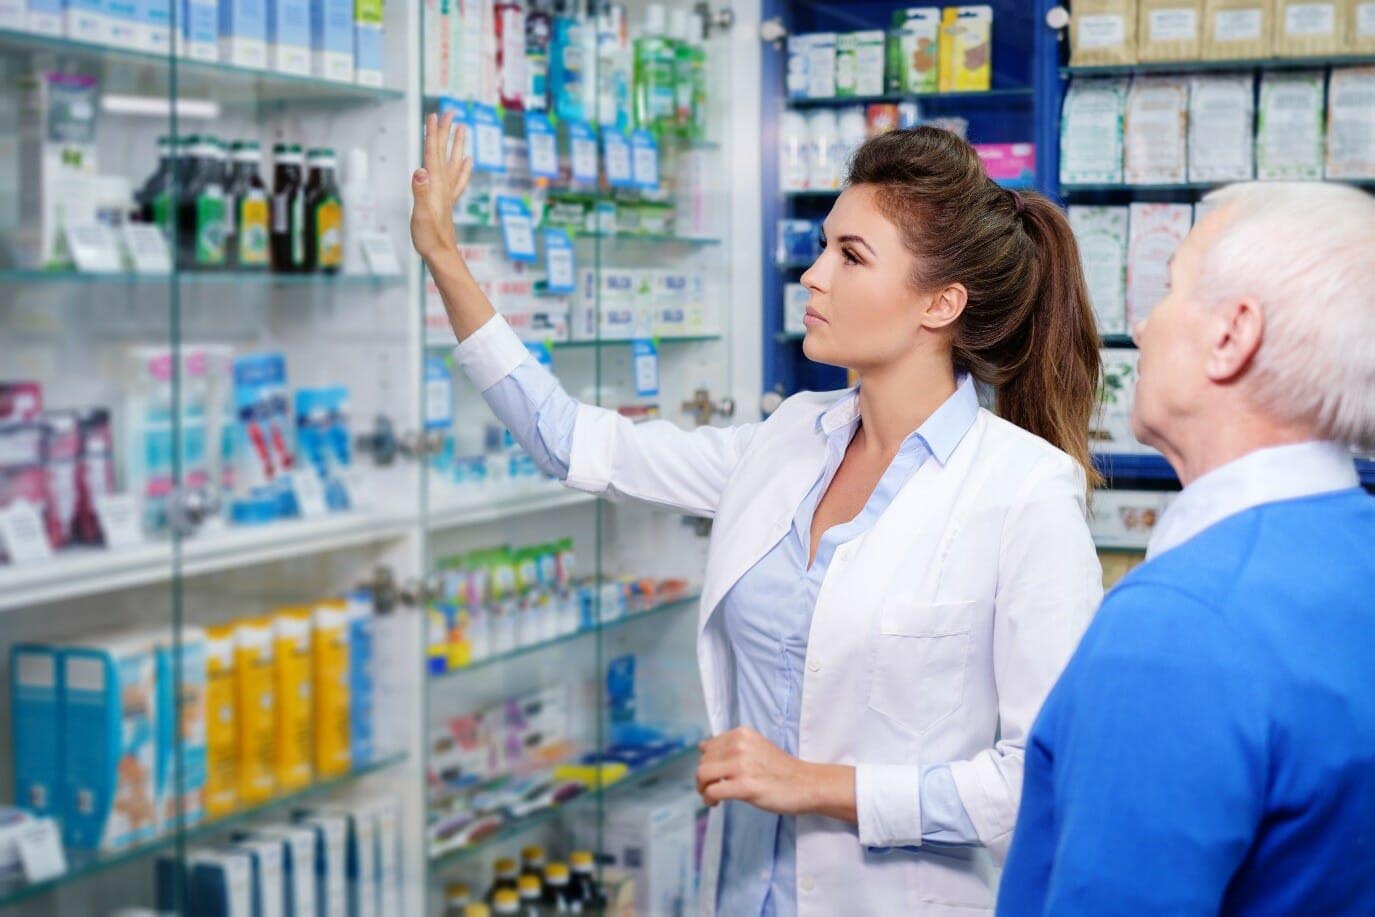 Is Pharmacy Technician the Right Job for You? Here’s What You Need to Know